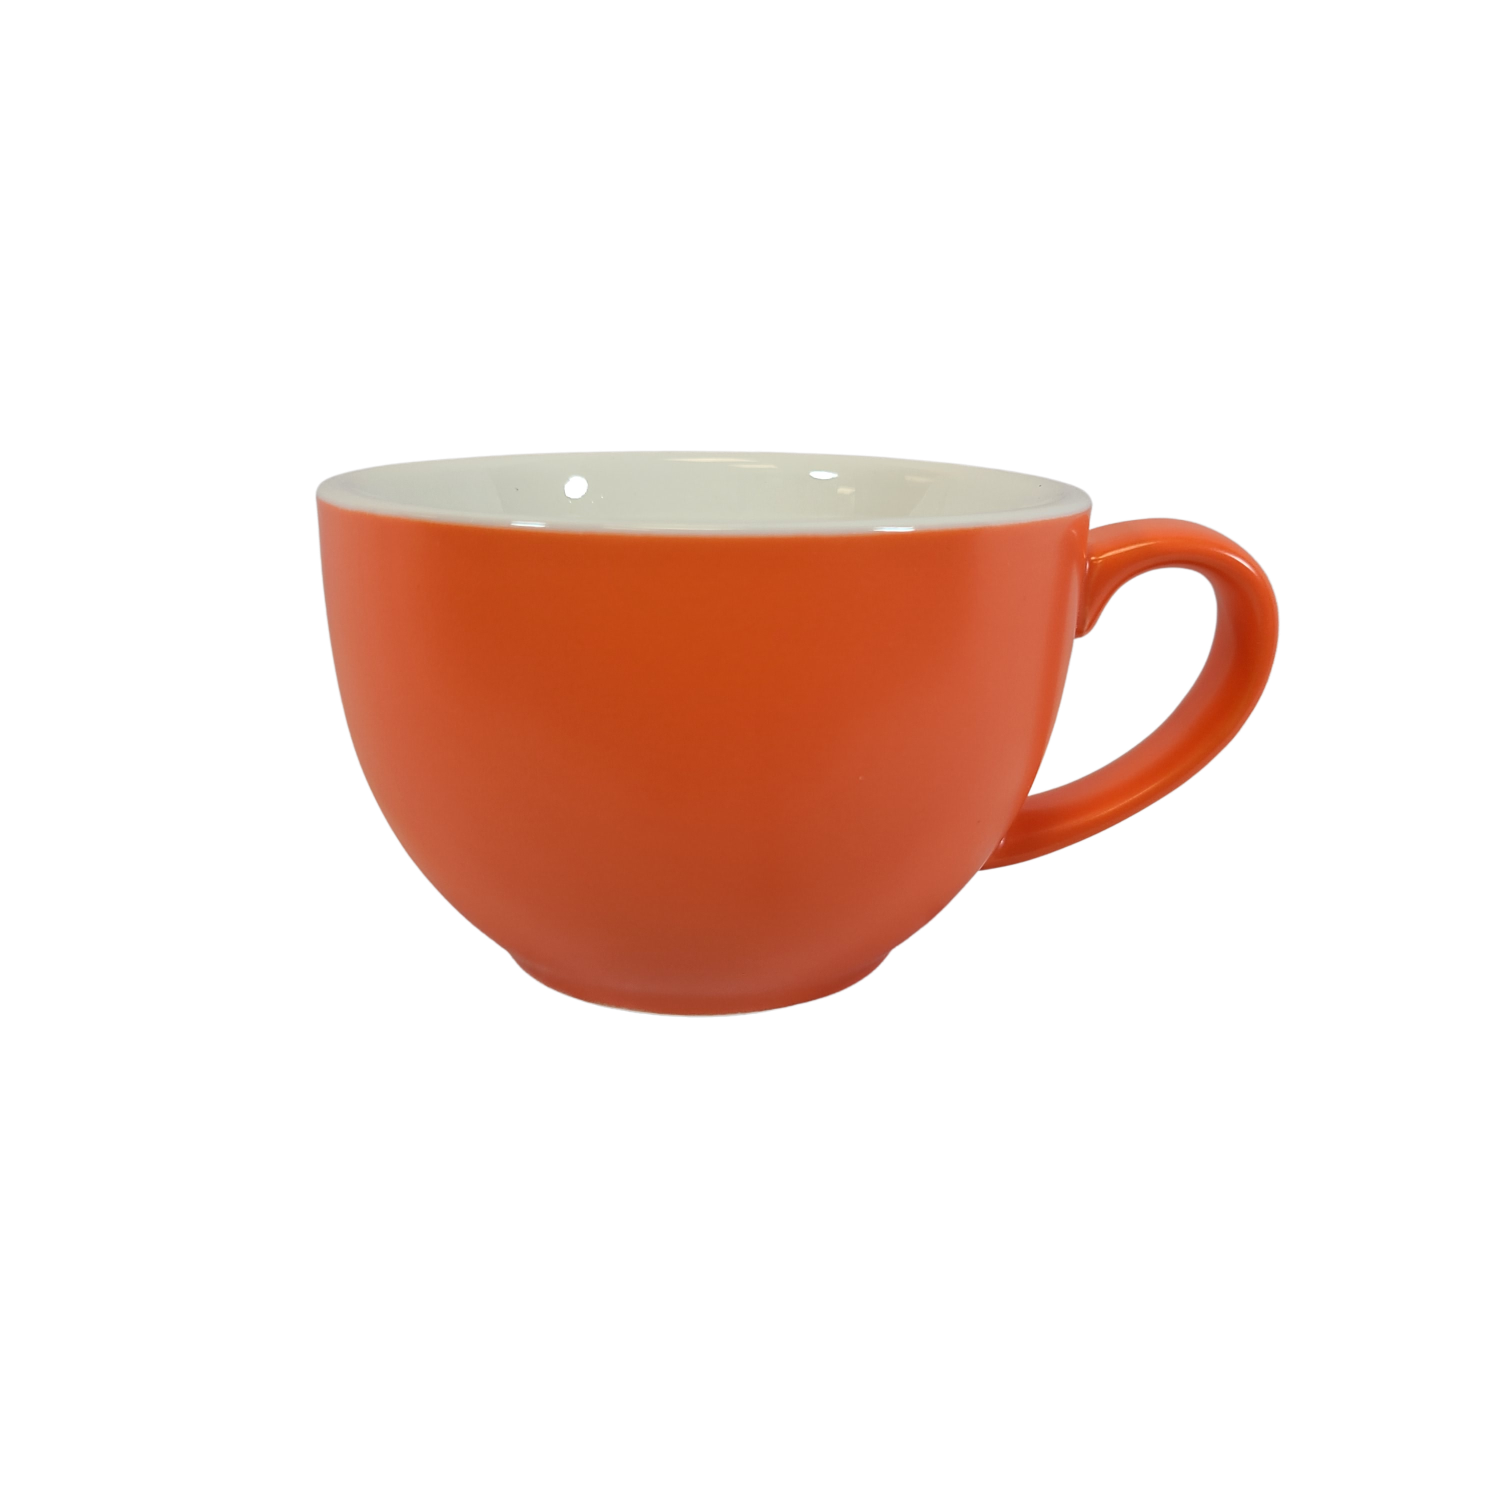 Coffee Addicts commercial ceramic cup in matte orange latte cup 12oz 350ml